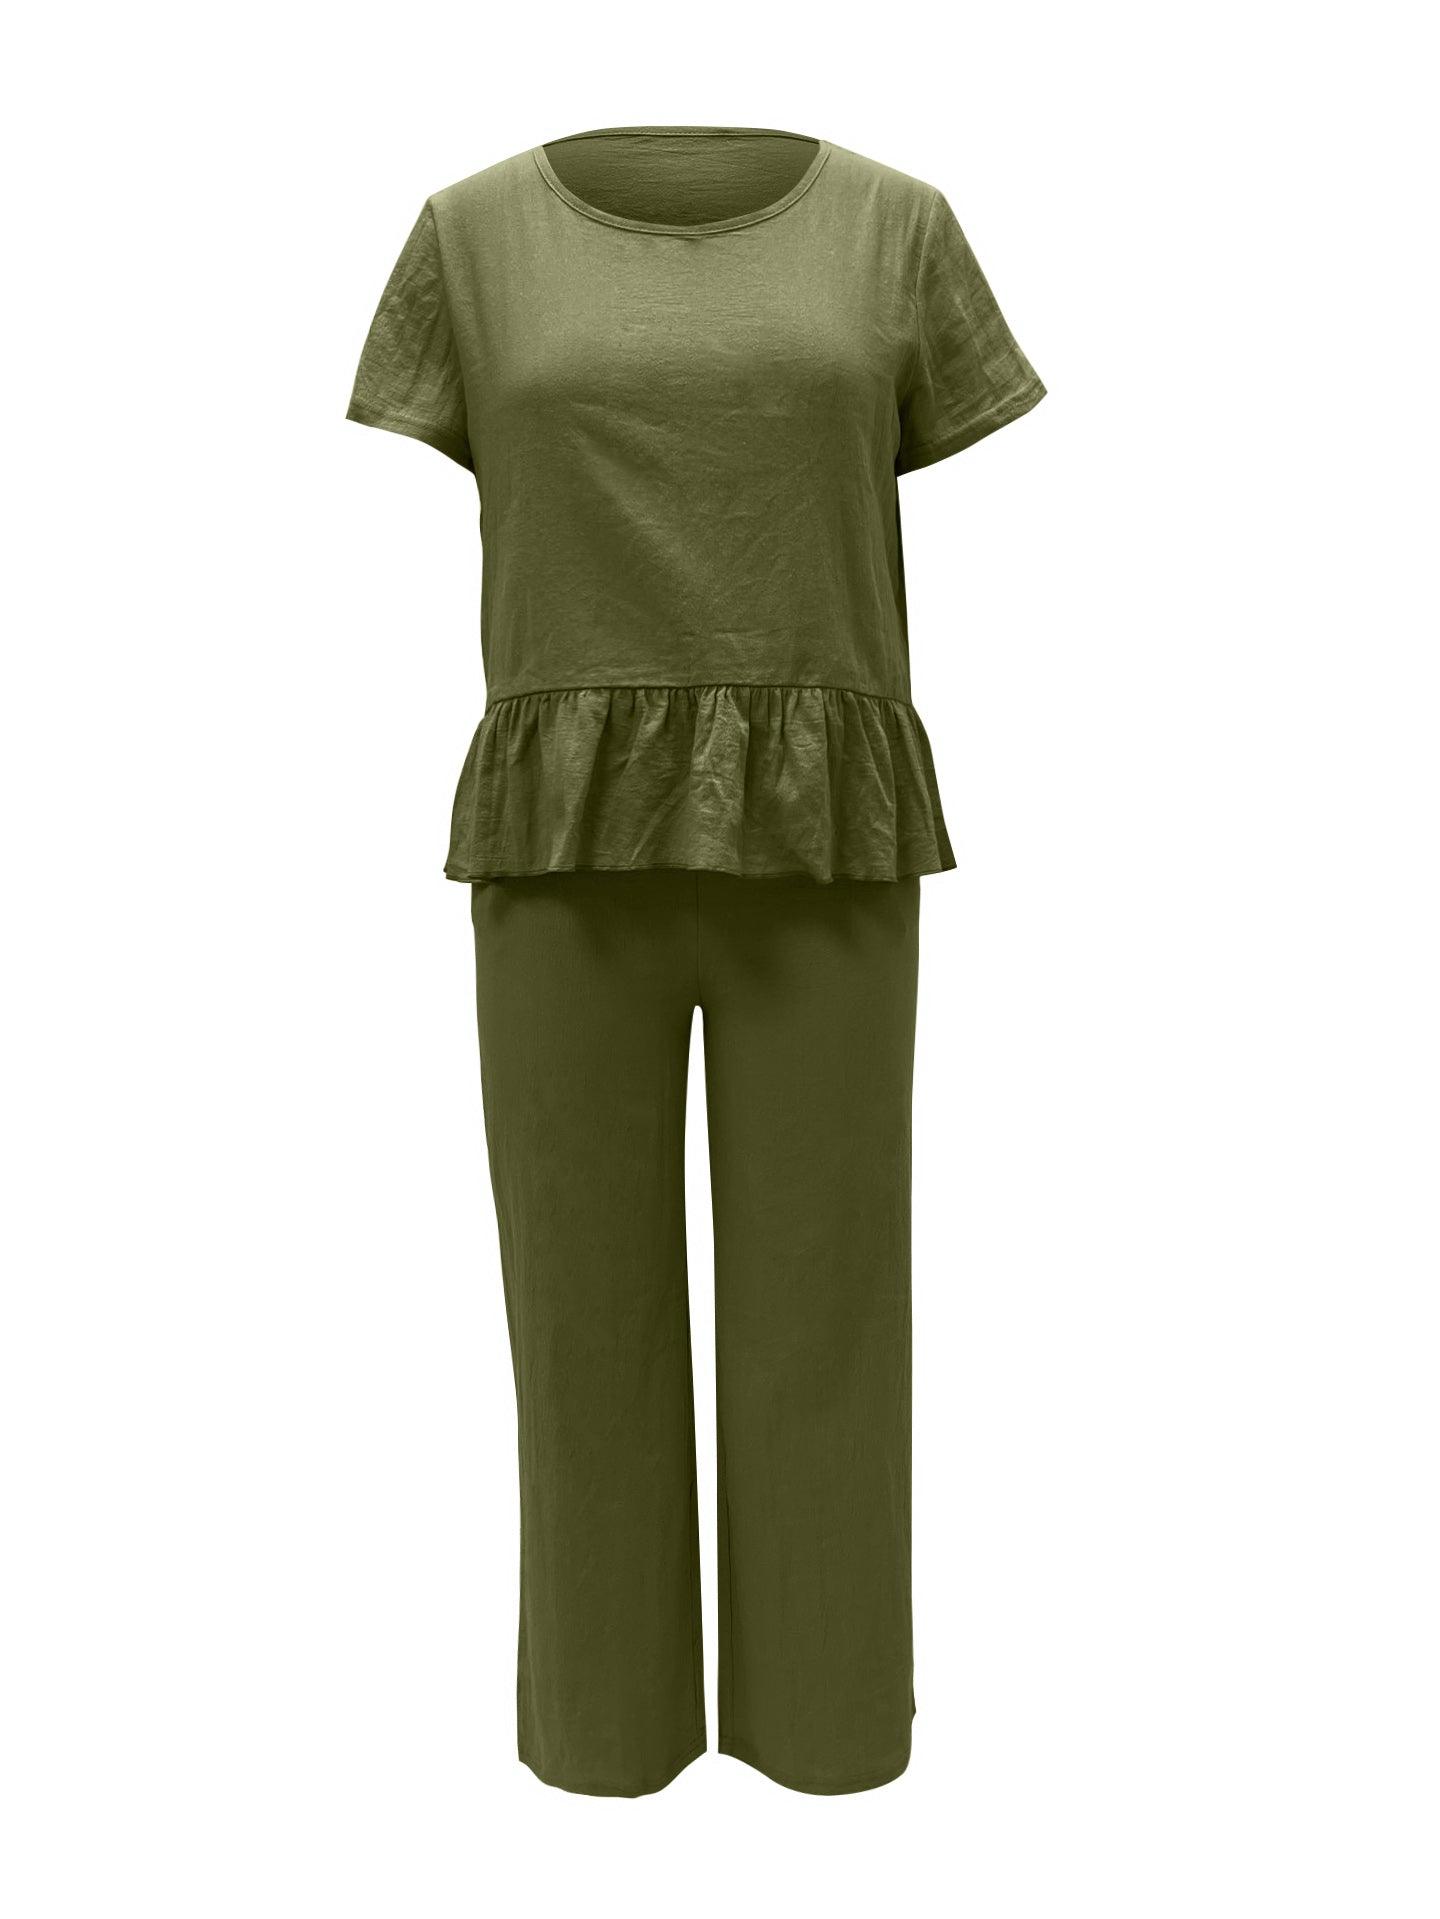 a woman wearing a green top and pants